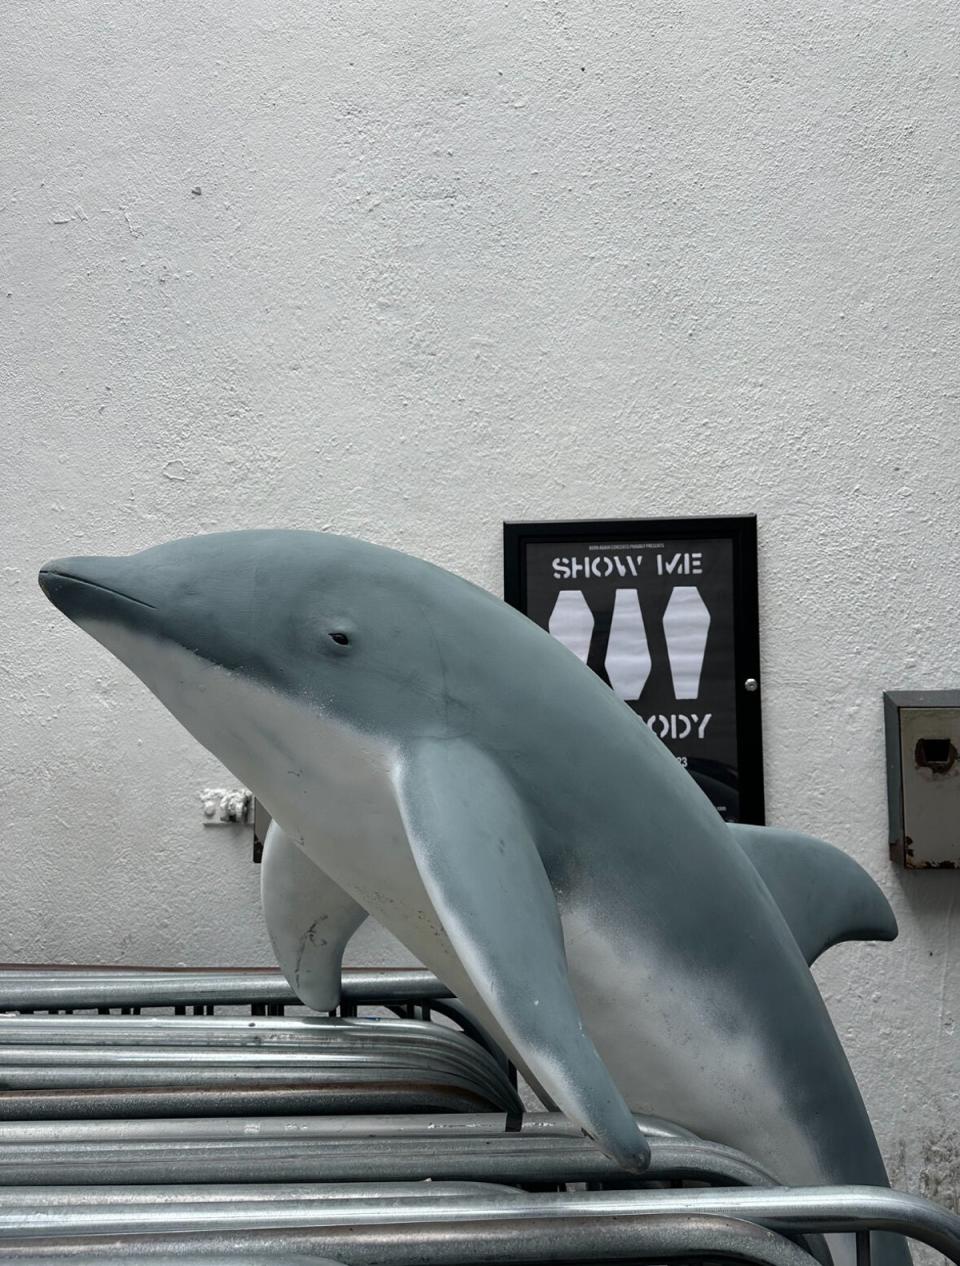 One reveller may be feeling lost without their life-sized fiberglass dolphin (PR Handout)